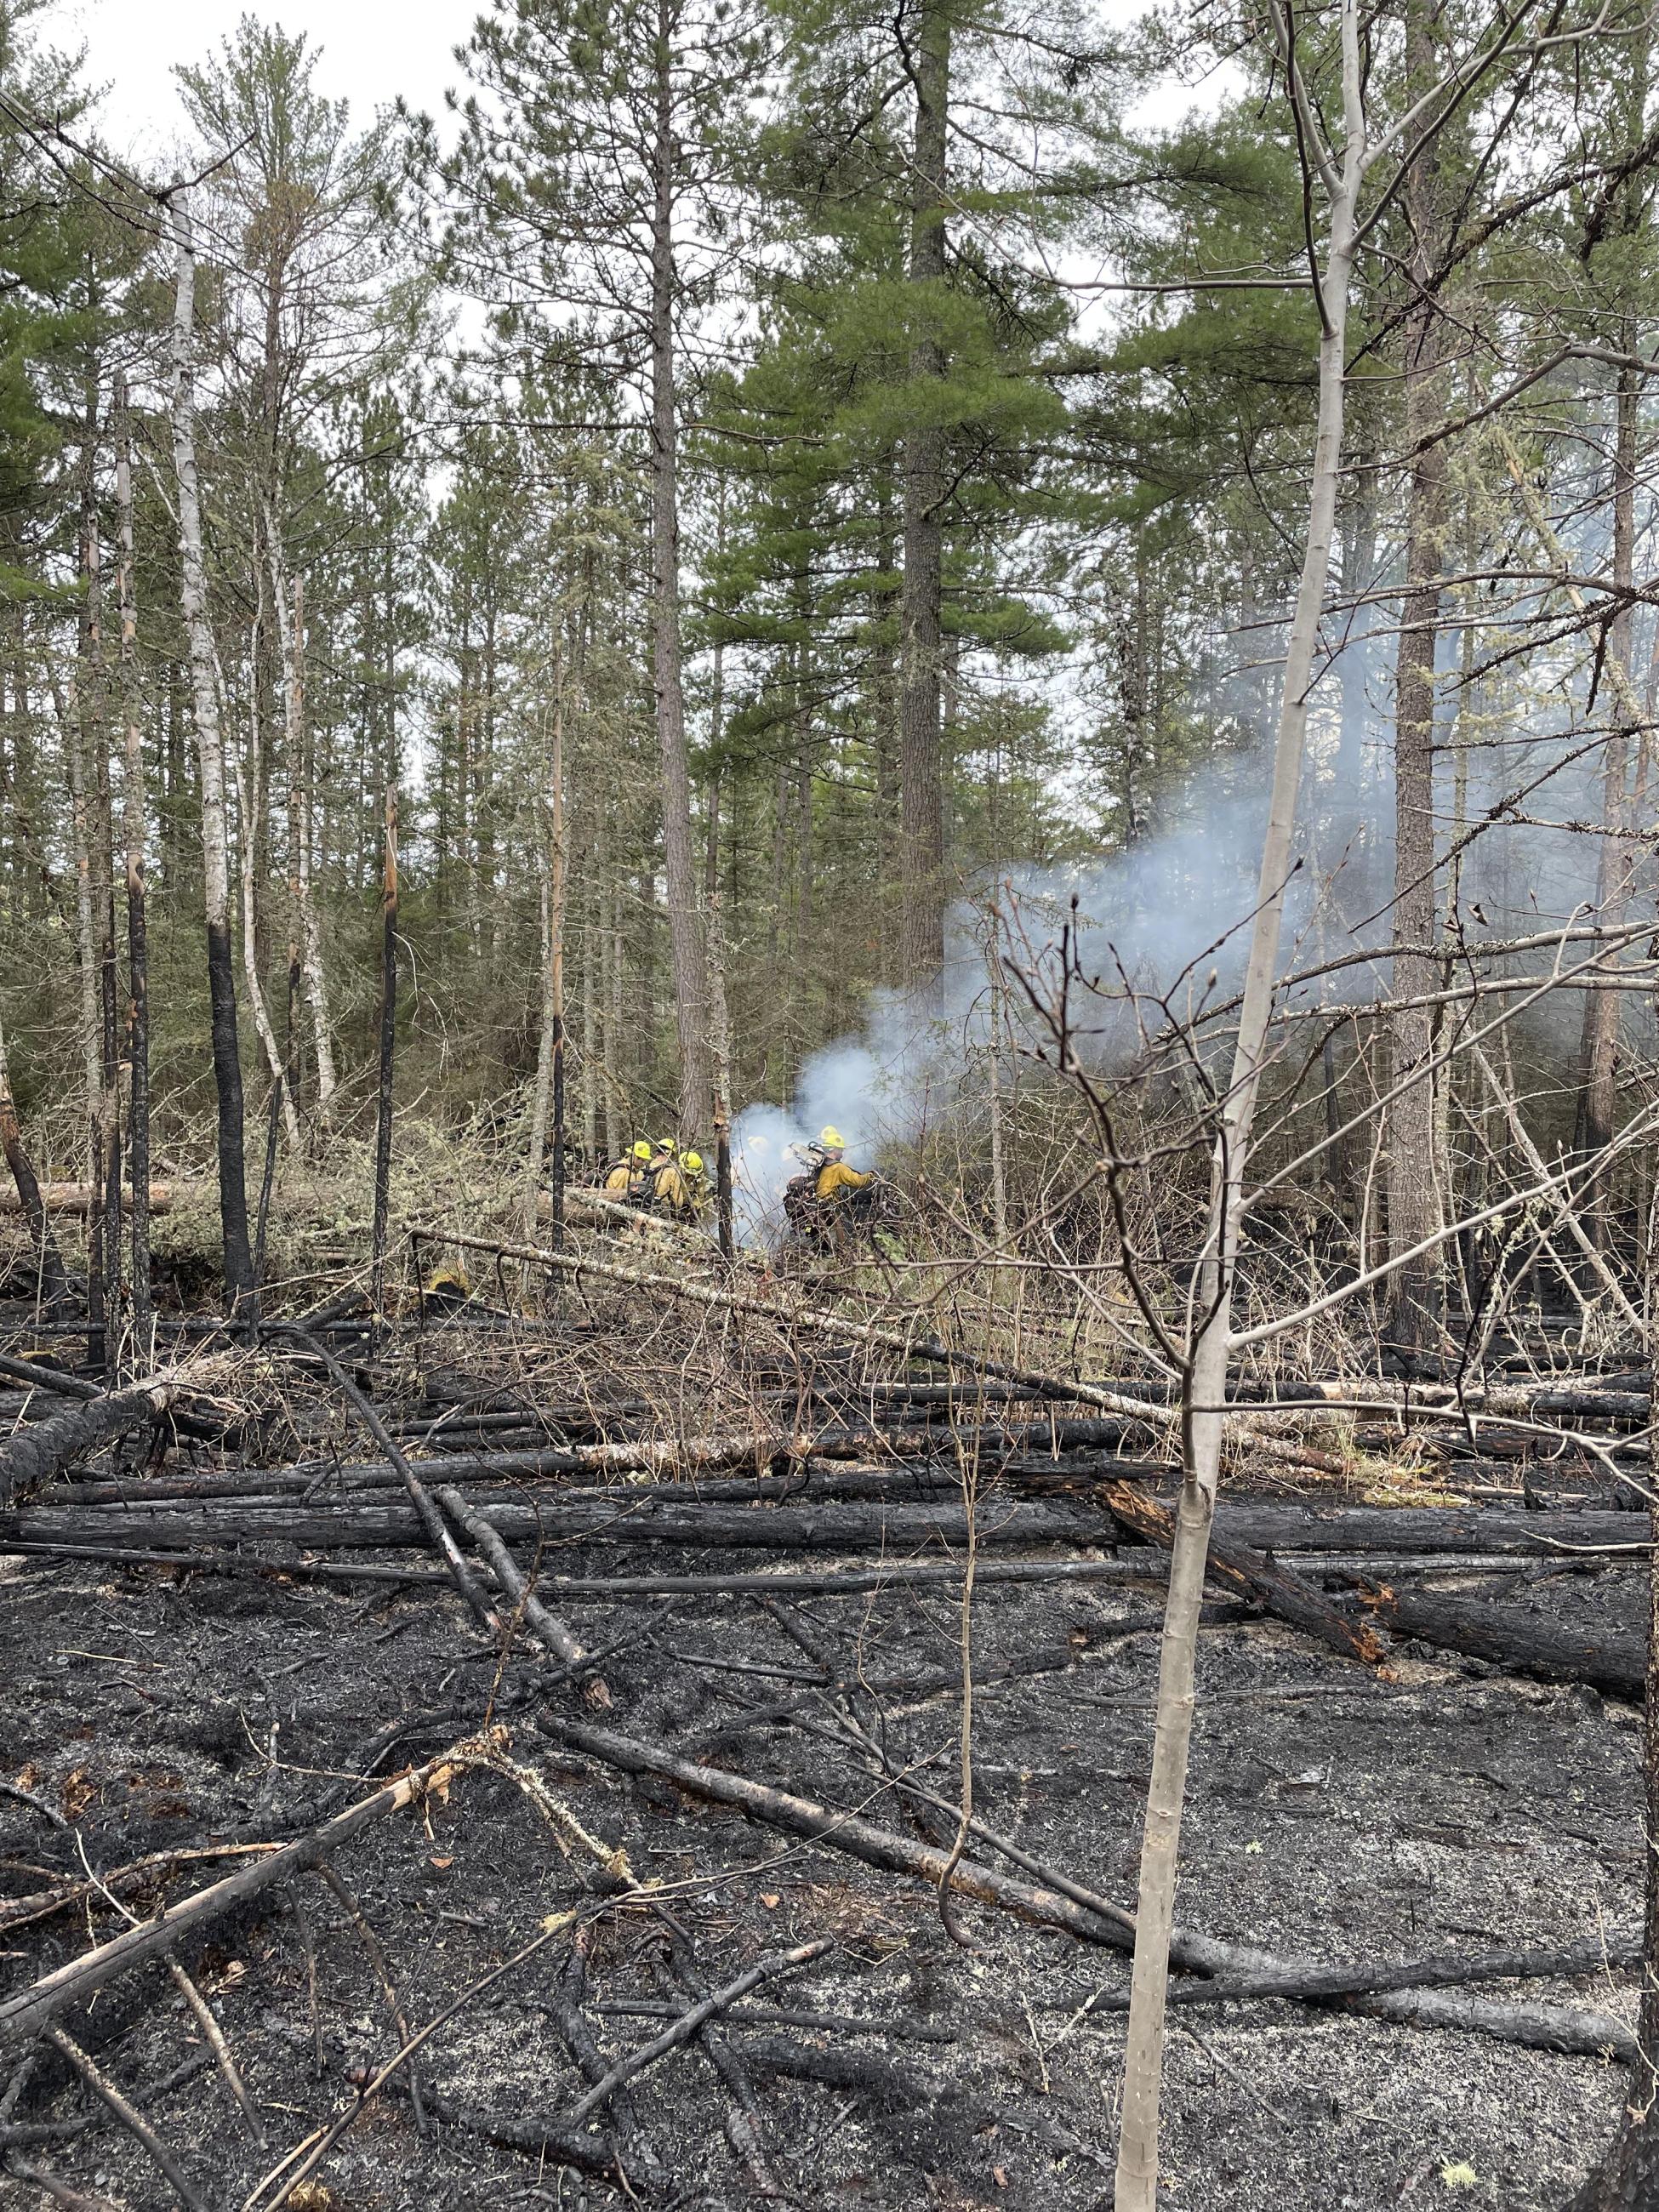 Single smoke comes from a stump in a fire area